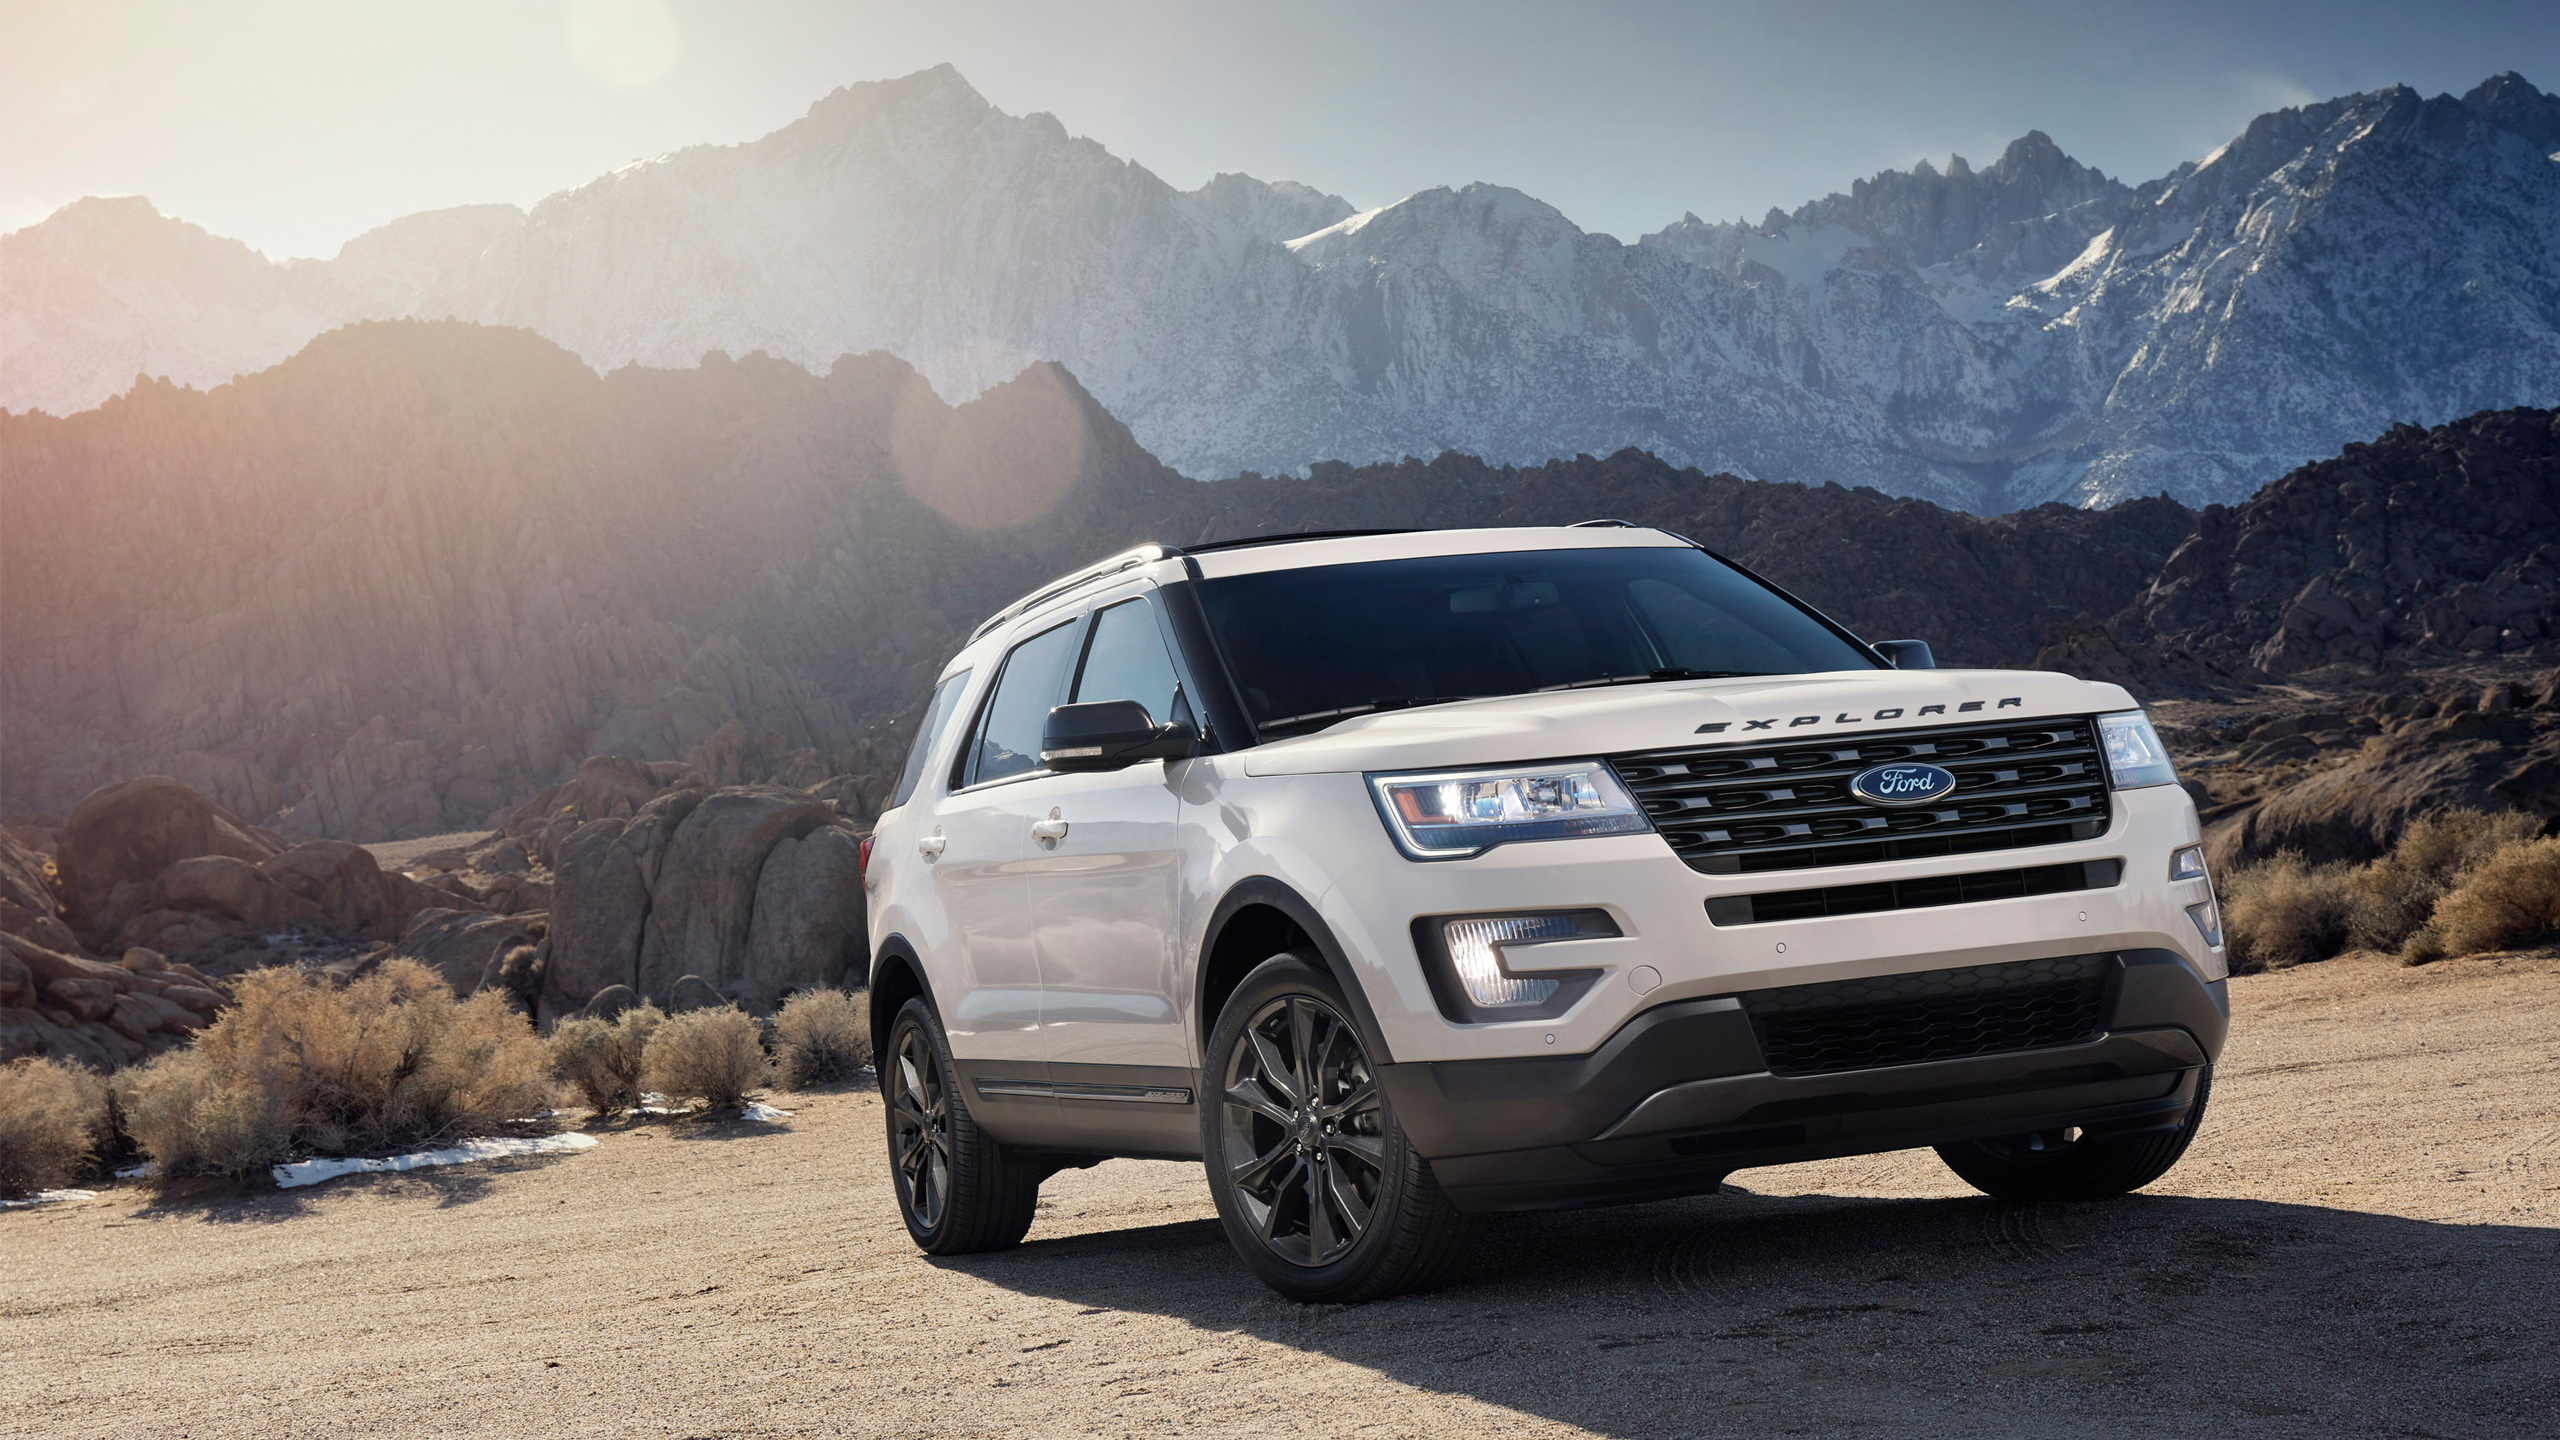 2017 Ford Explorer XLT Appearance Package Wallpaper HD